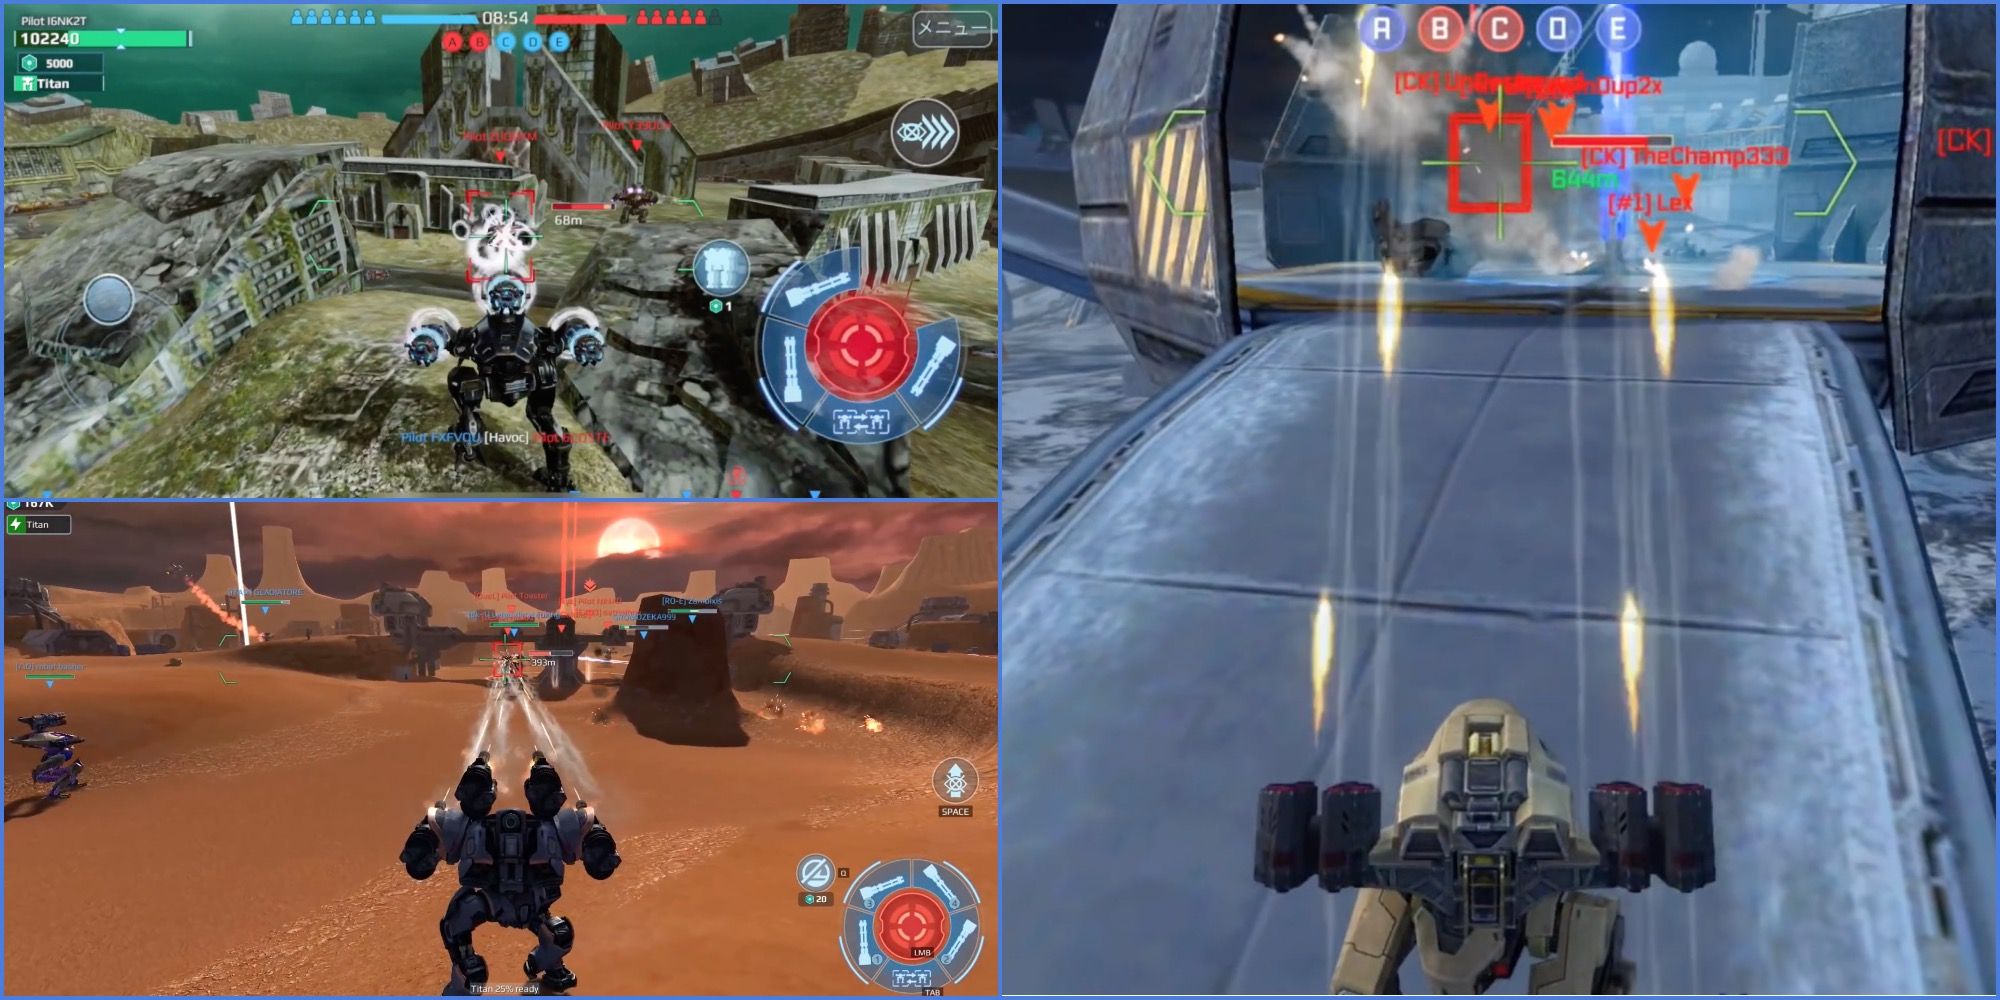 Light Weapons in War Robots - Feature - Players destroy robots on map